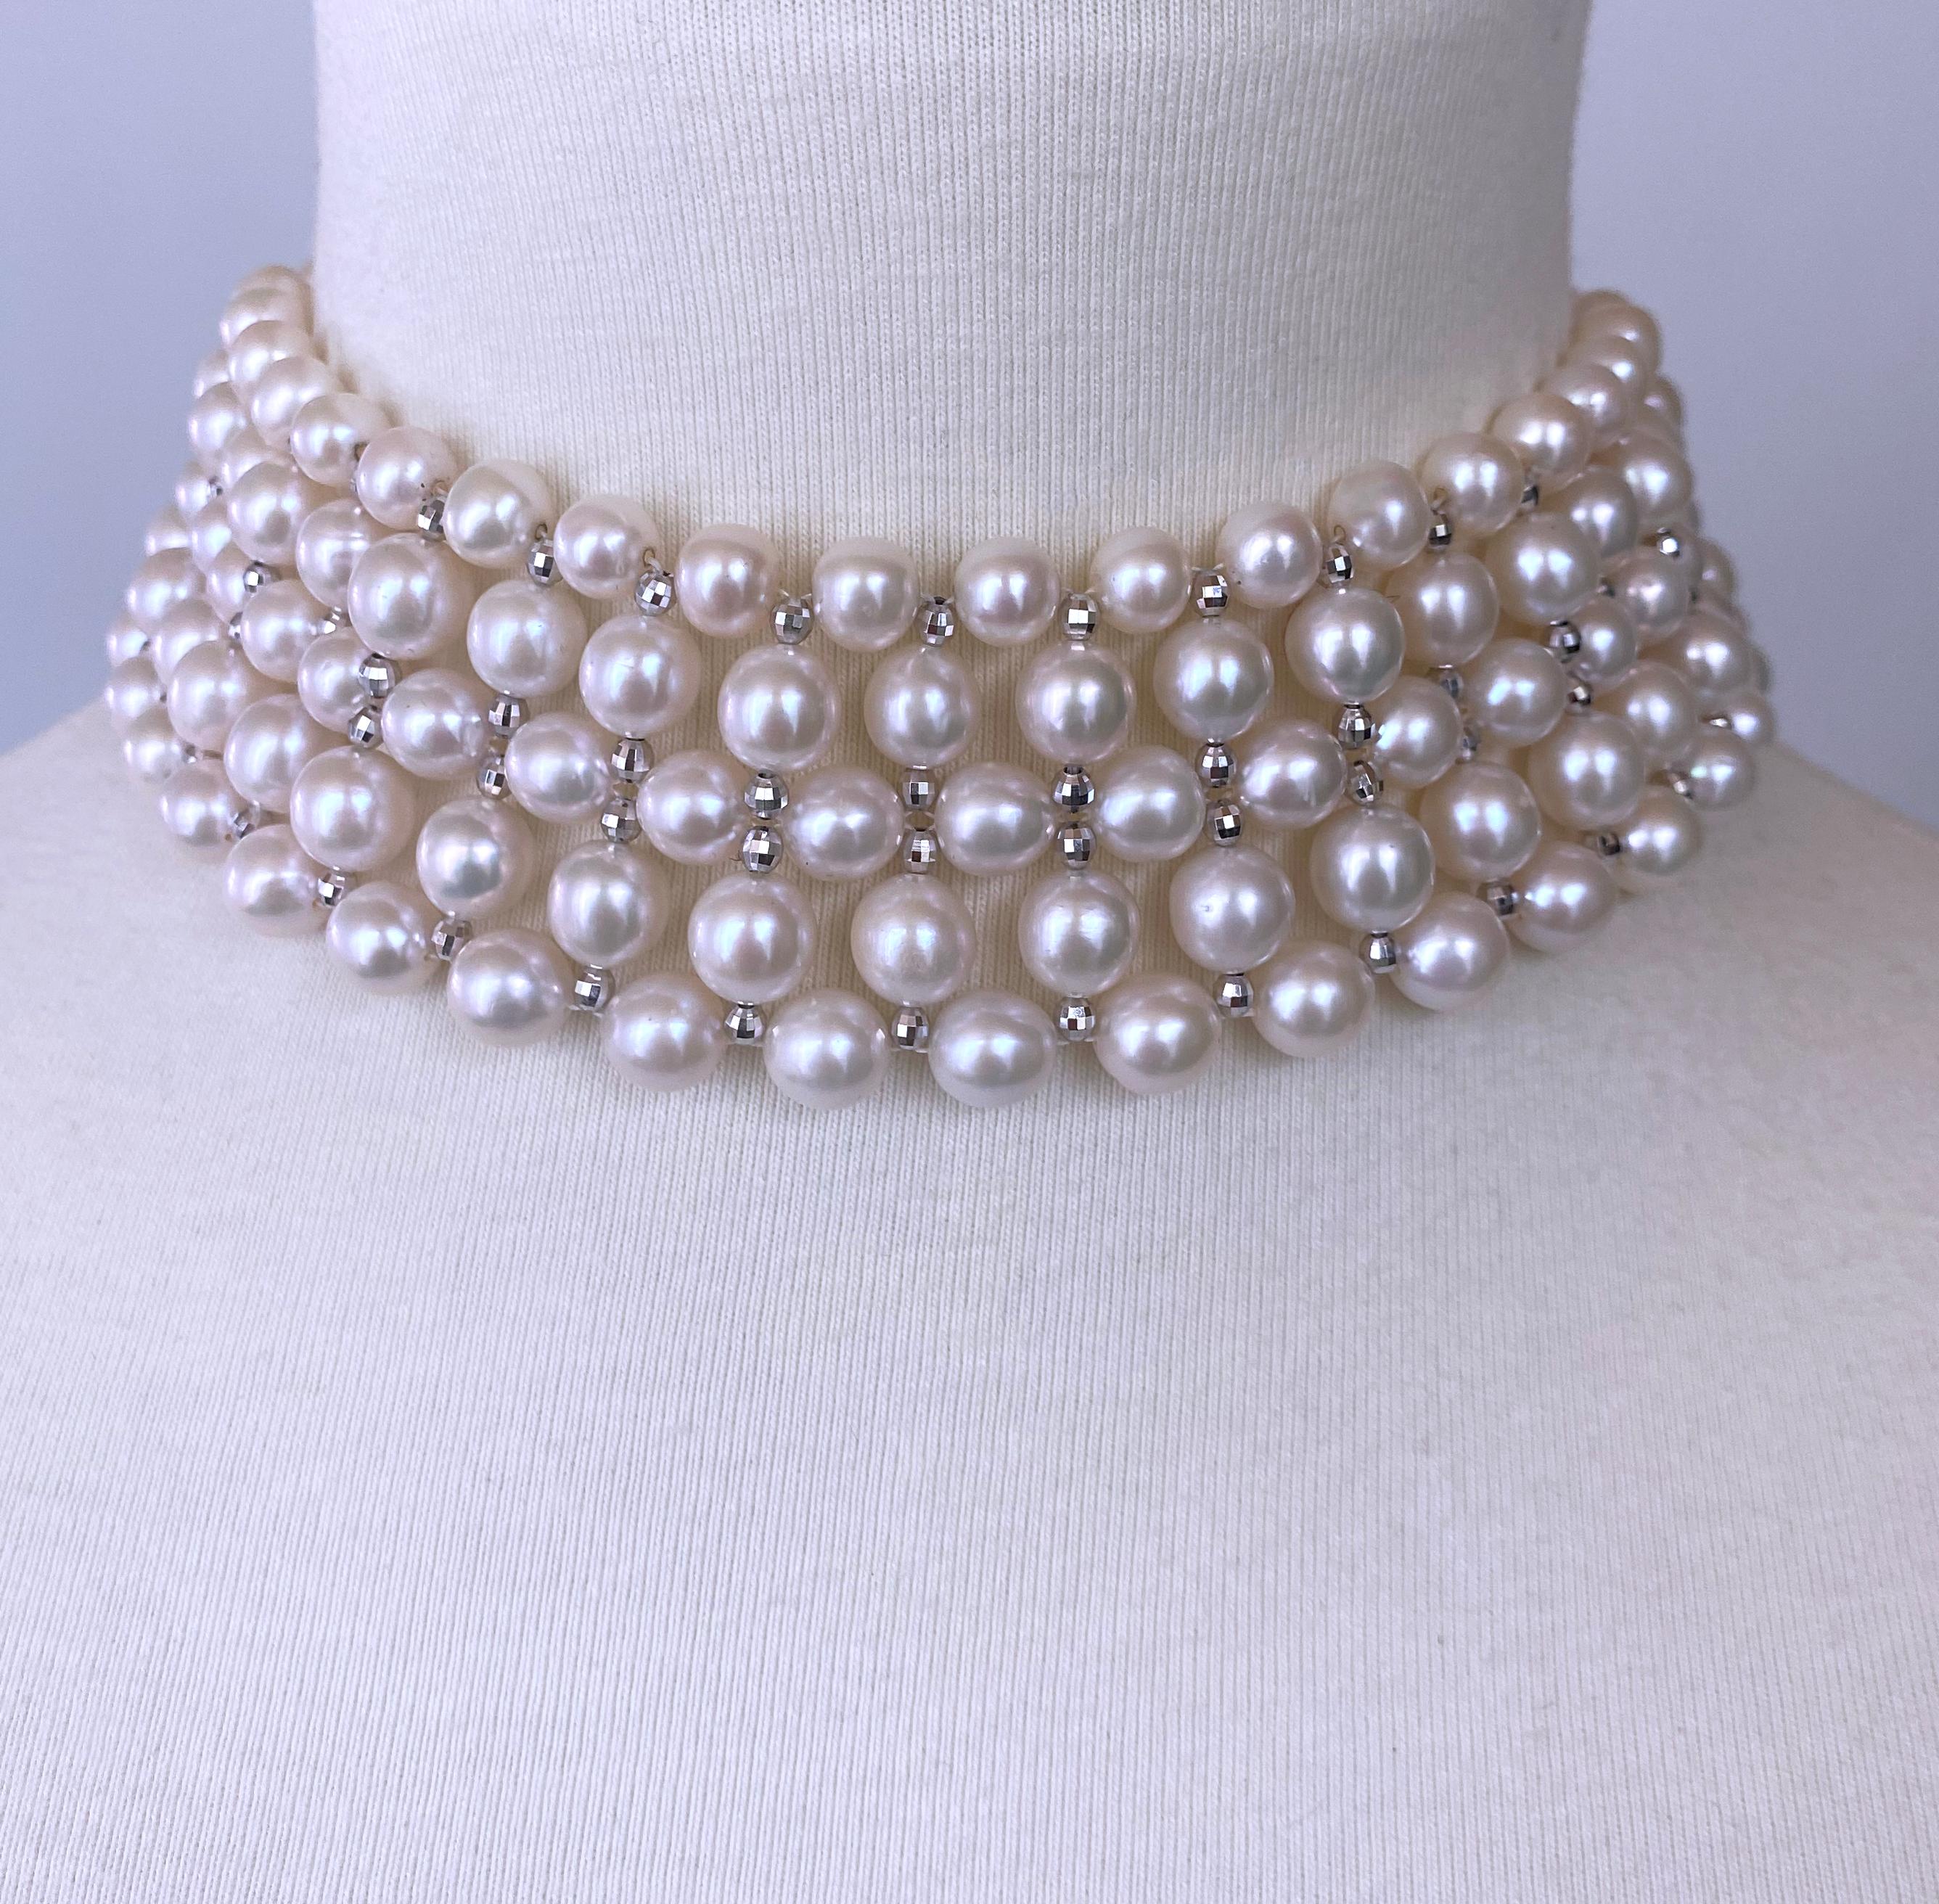 Artisan Marina J. Woven Pearl Choker with Silver Rhodium Plated Disco Accents For Sale